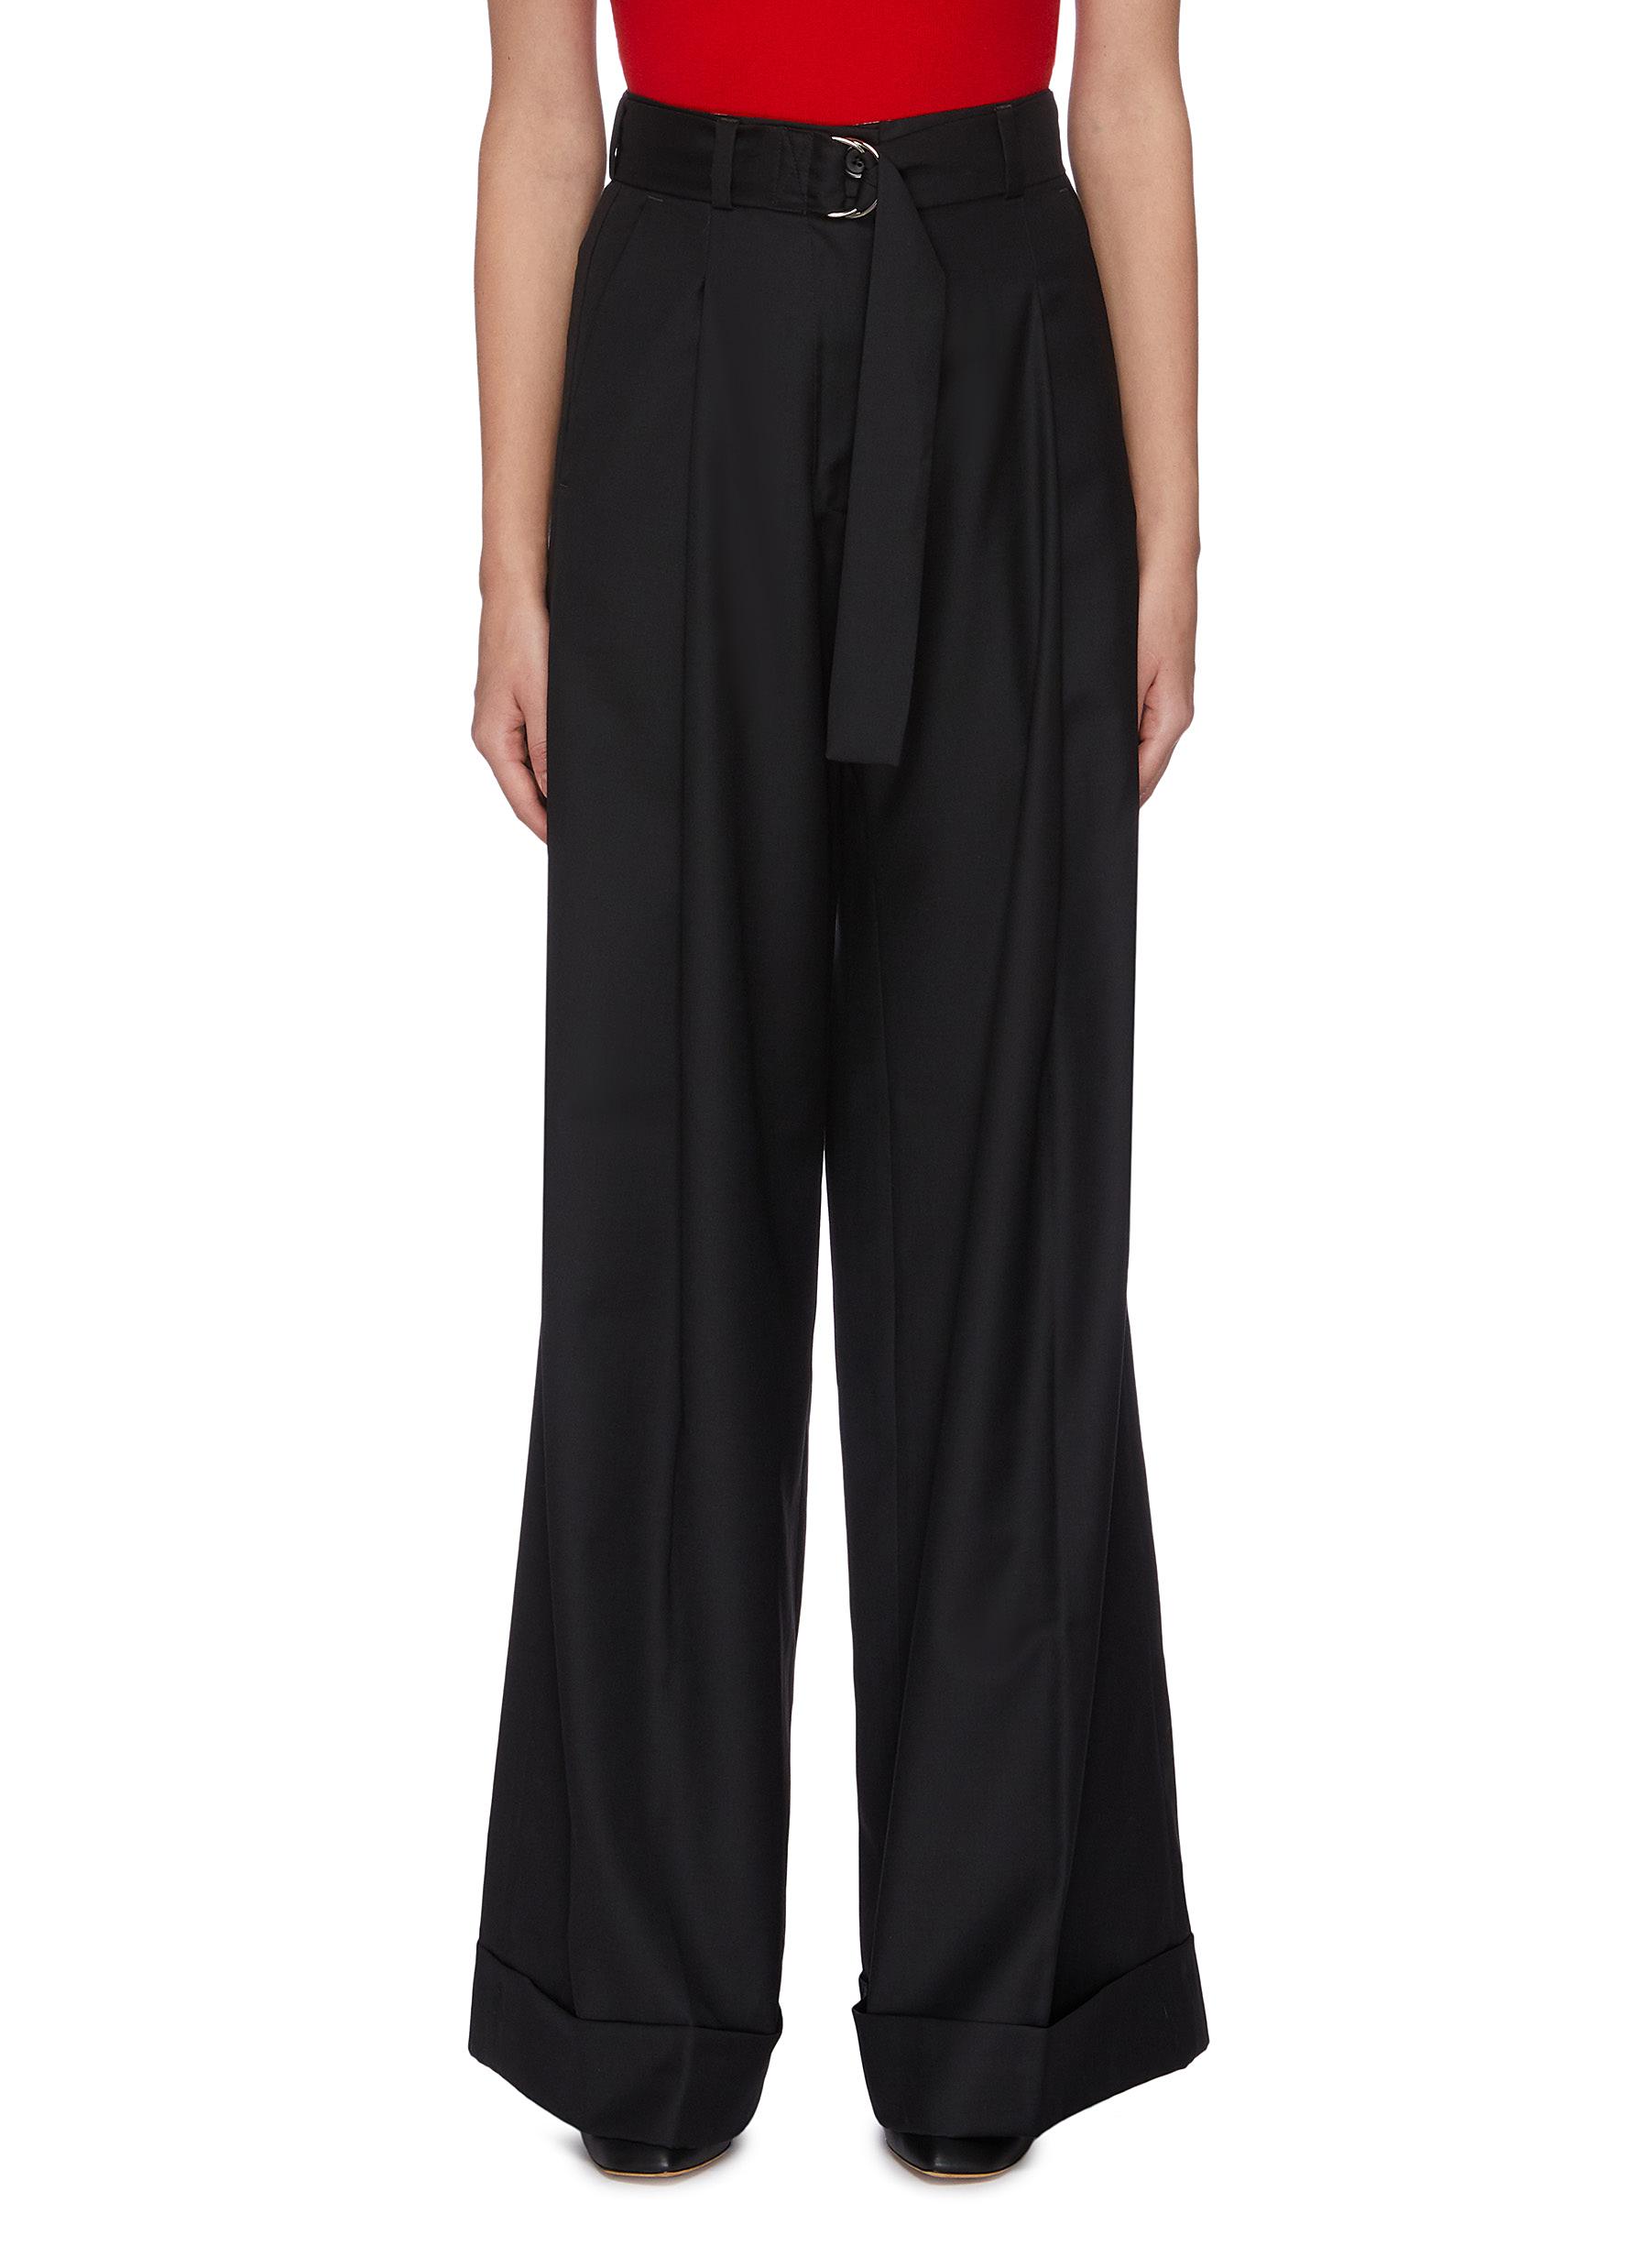 Belted pleated wide leg pants by J.Cricket